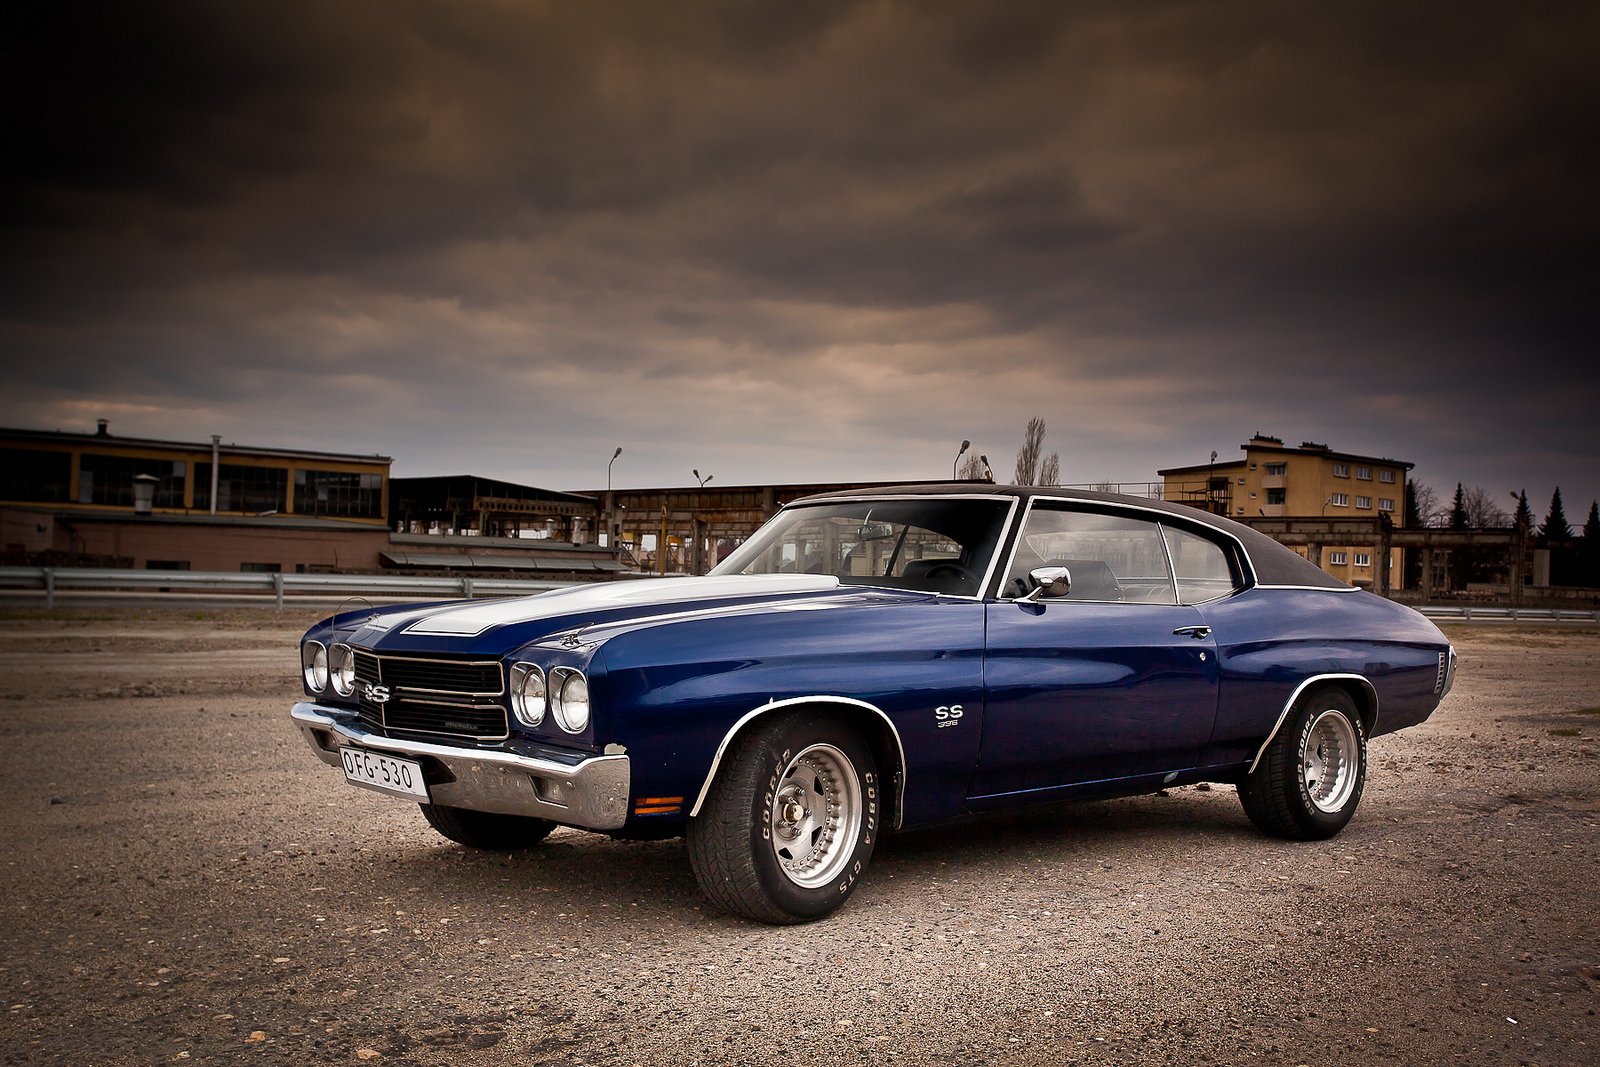 chevelle, Chevrolet, Chevy, Malibu, Cars, Muscle, Vintage